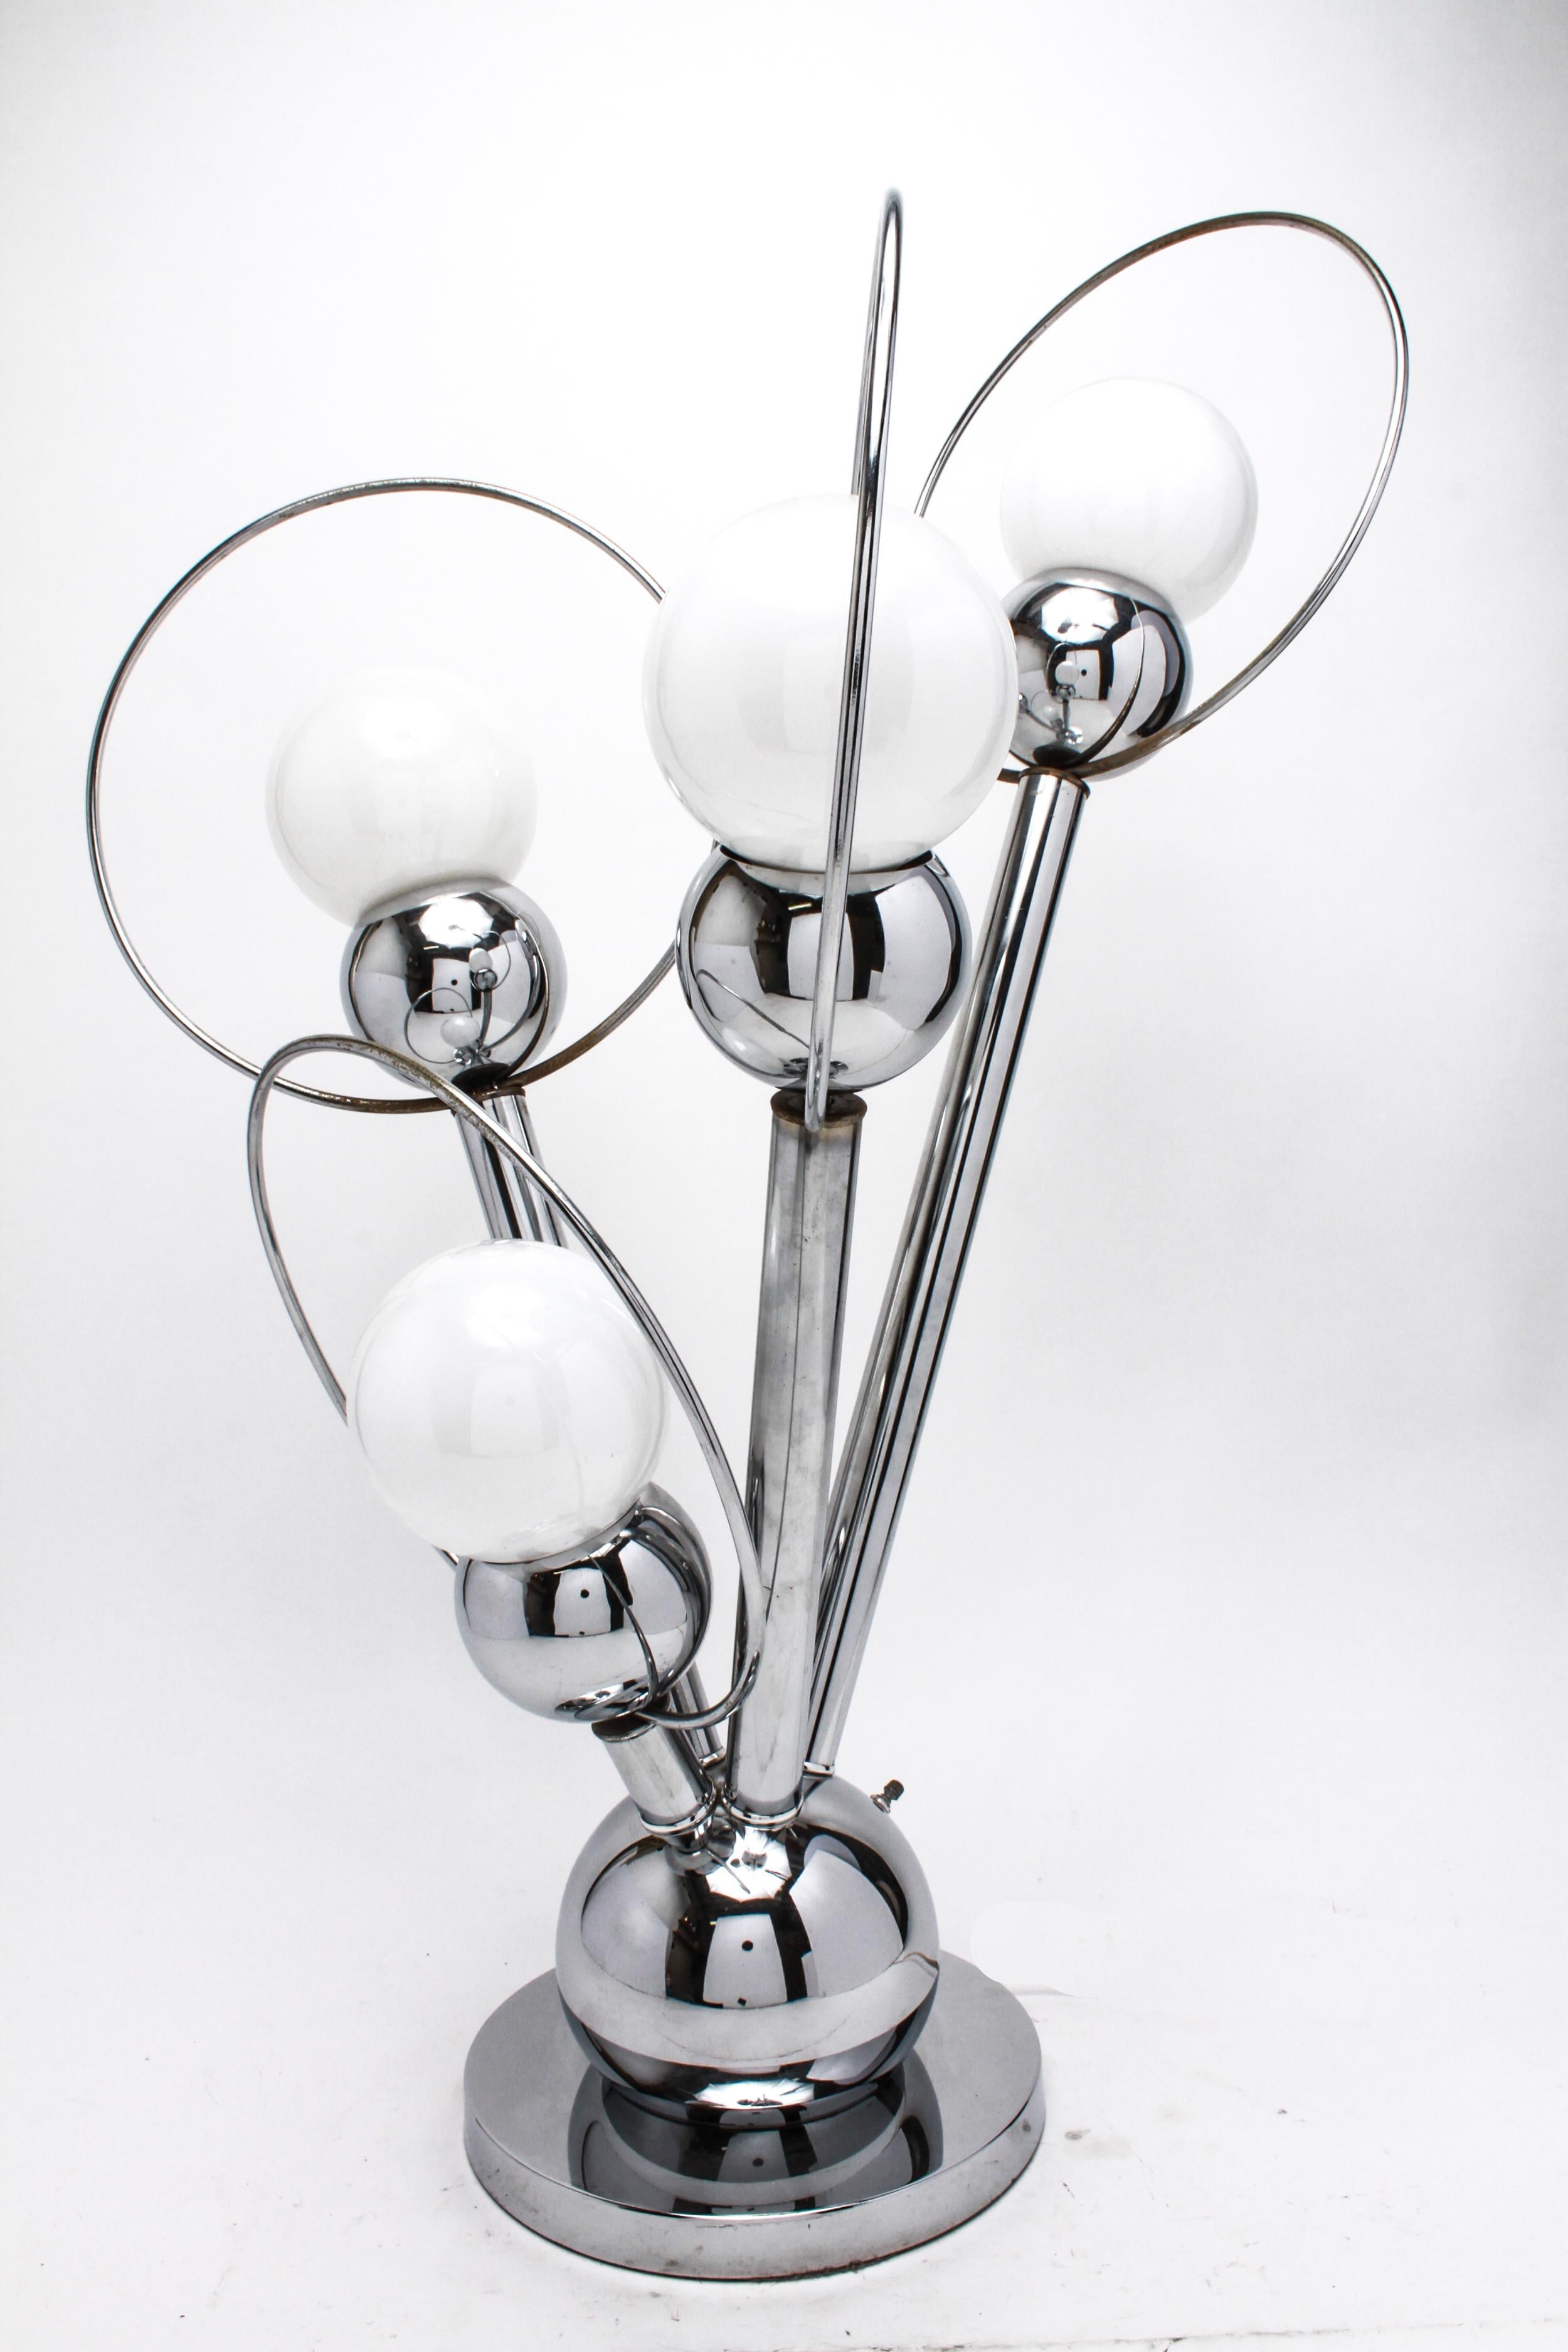 Mid-Century Modern atomic era Sputnik table lamp in chromed metal with four arms having dome ends with globe bulbs, encircled by large rings. The piece is in great vintage condition with some minor chrome wear to the rings.